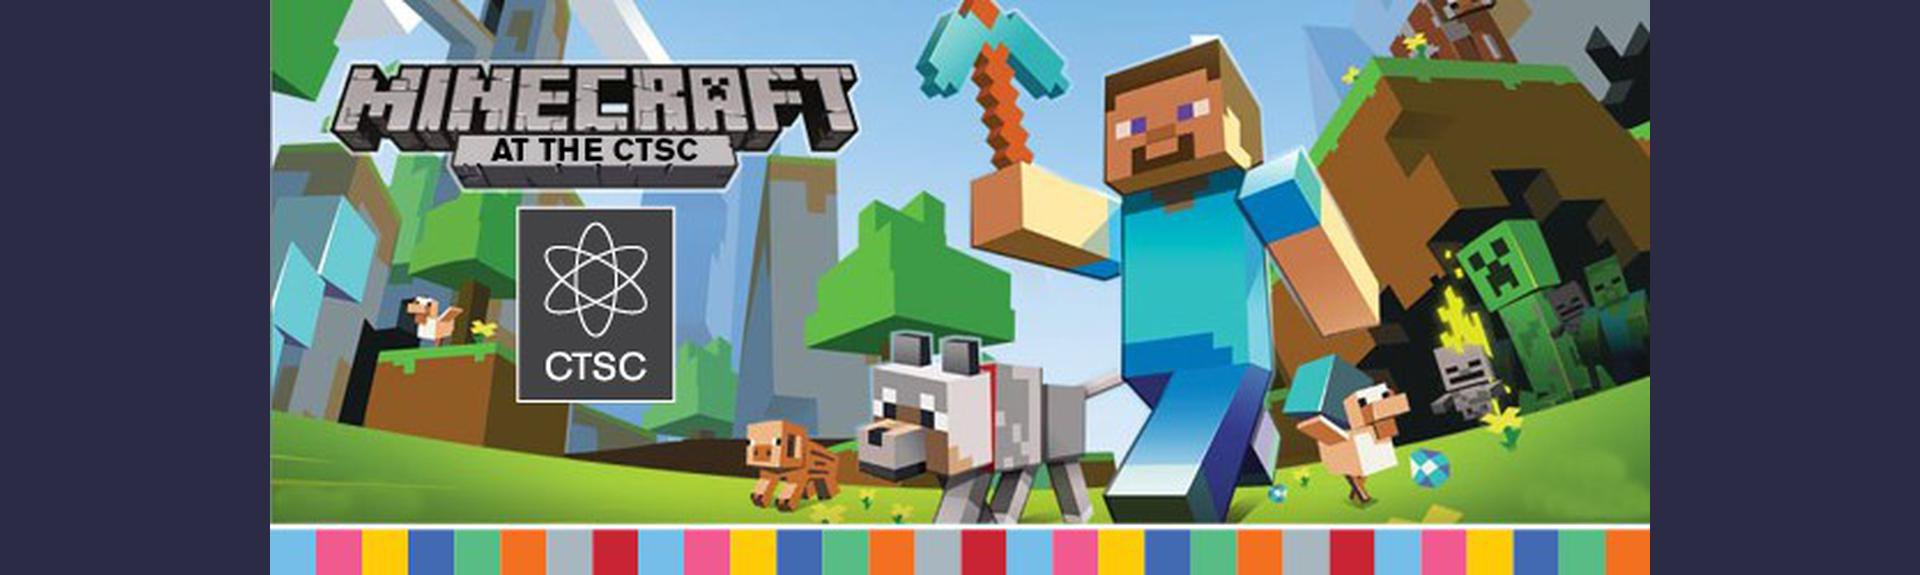 MINECRAFT AT THE CAPE TOWN SCIENCE CENTRE 